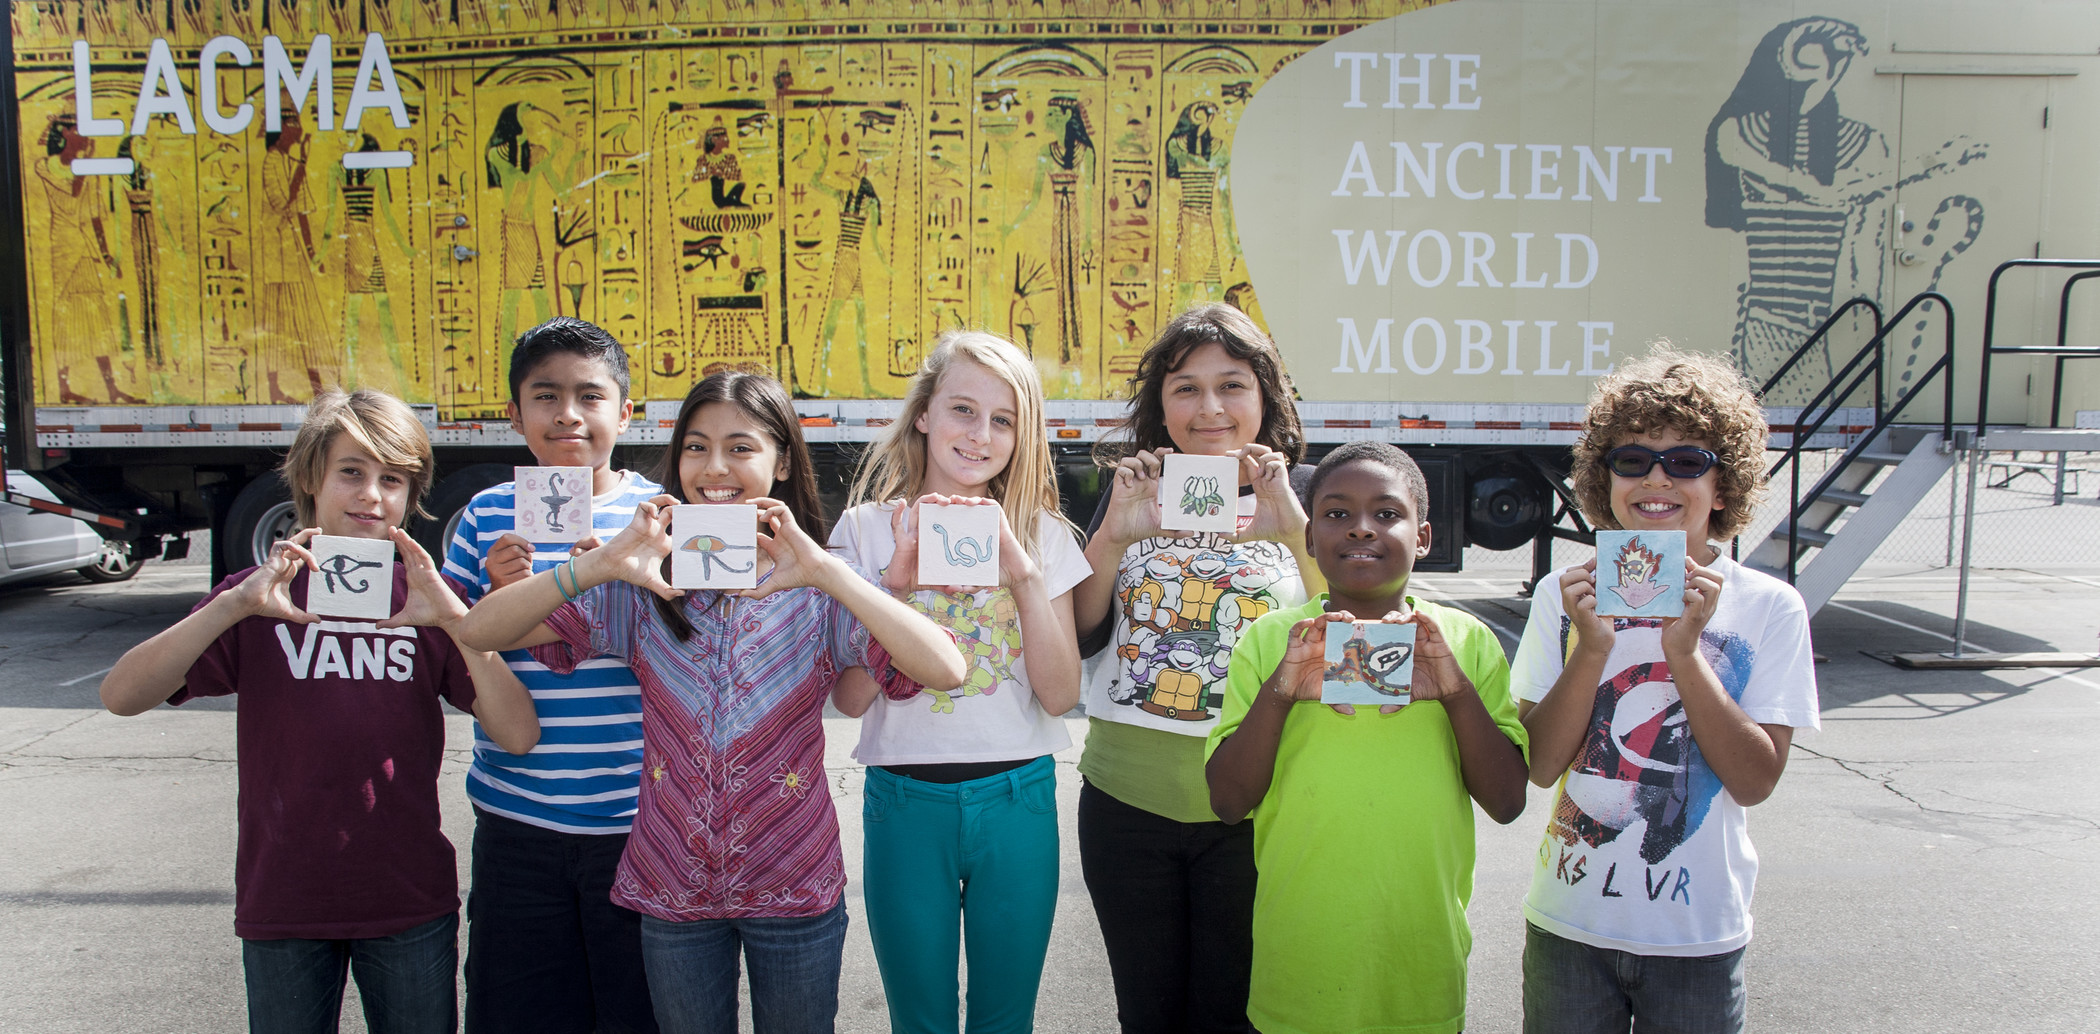 Photograph of the Ancient World Mobile Outreach program